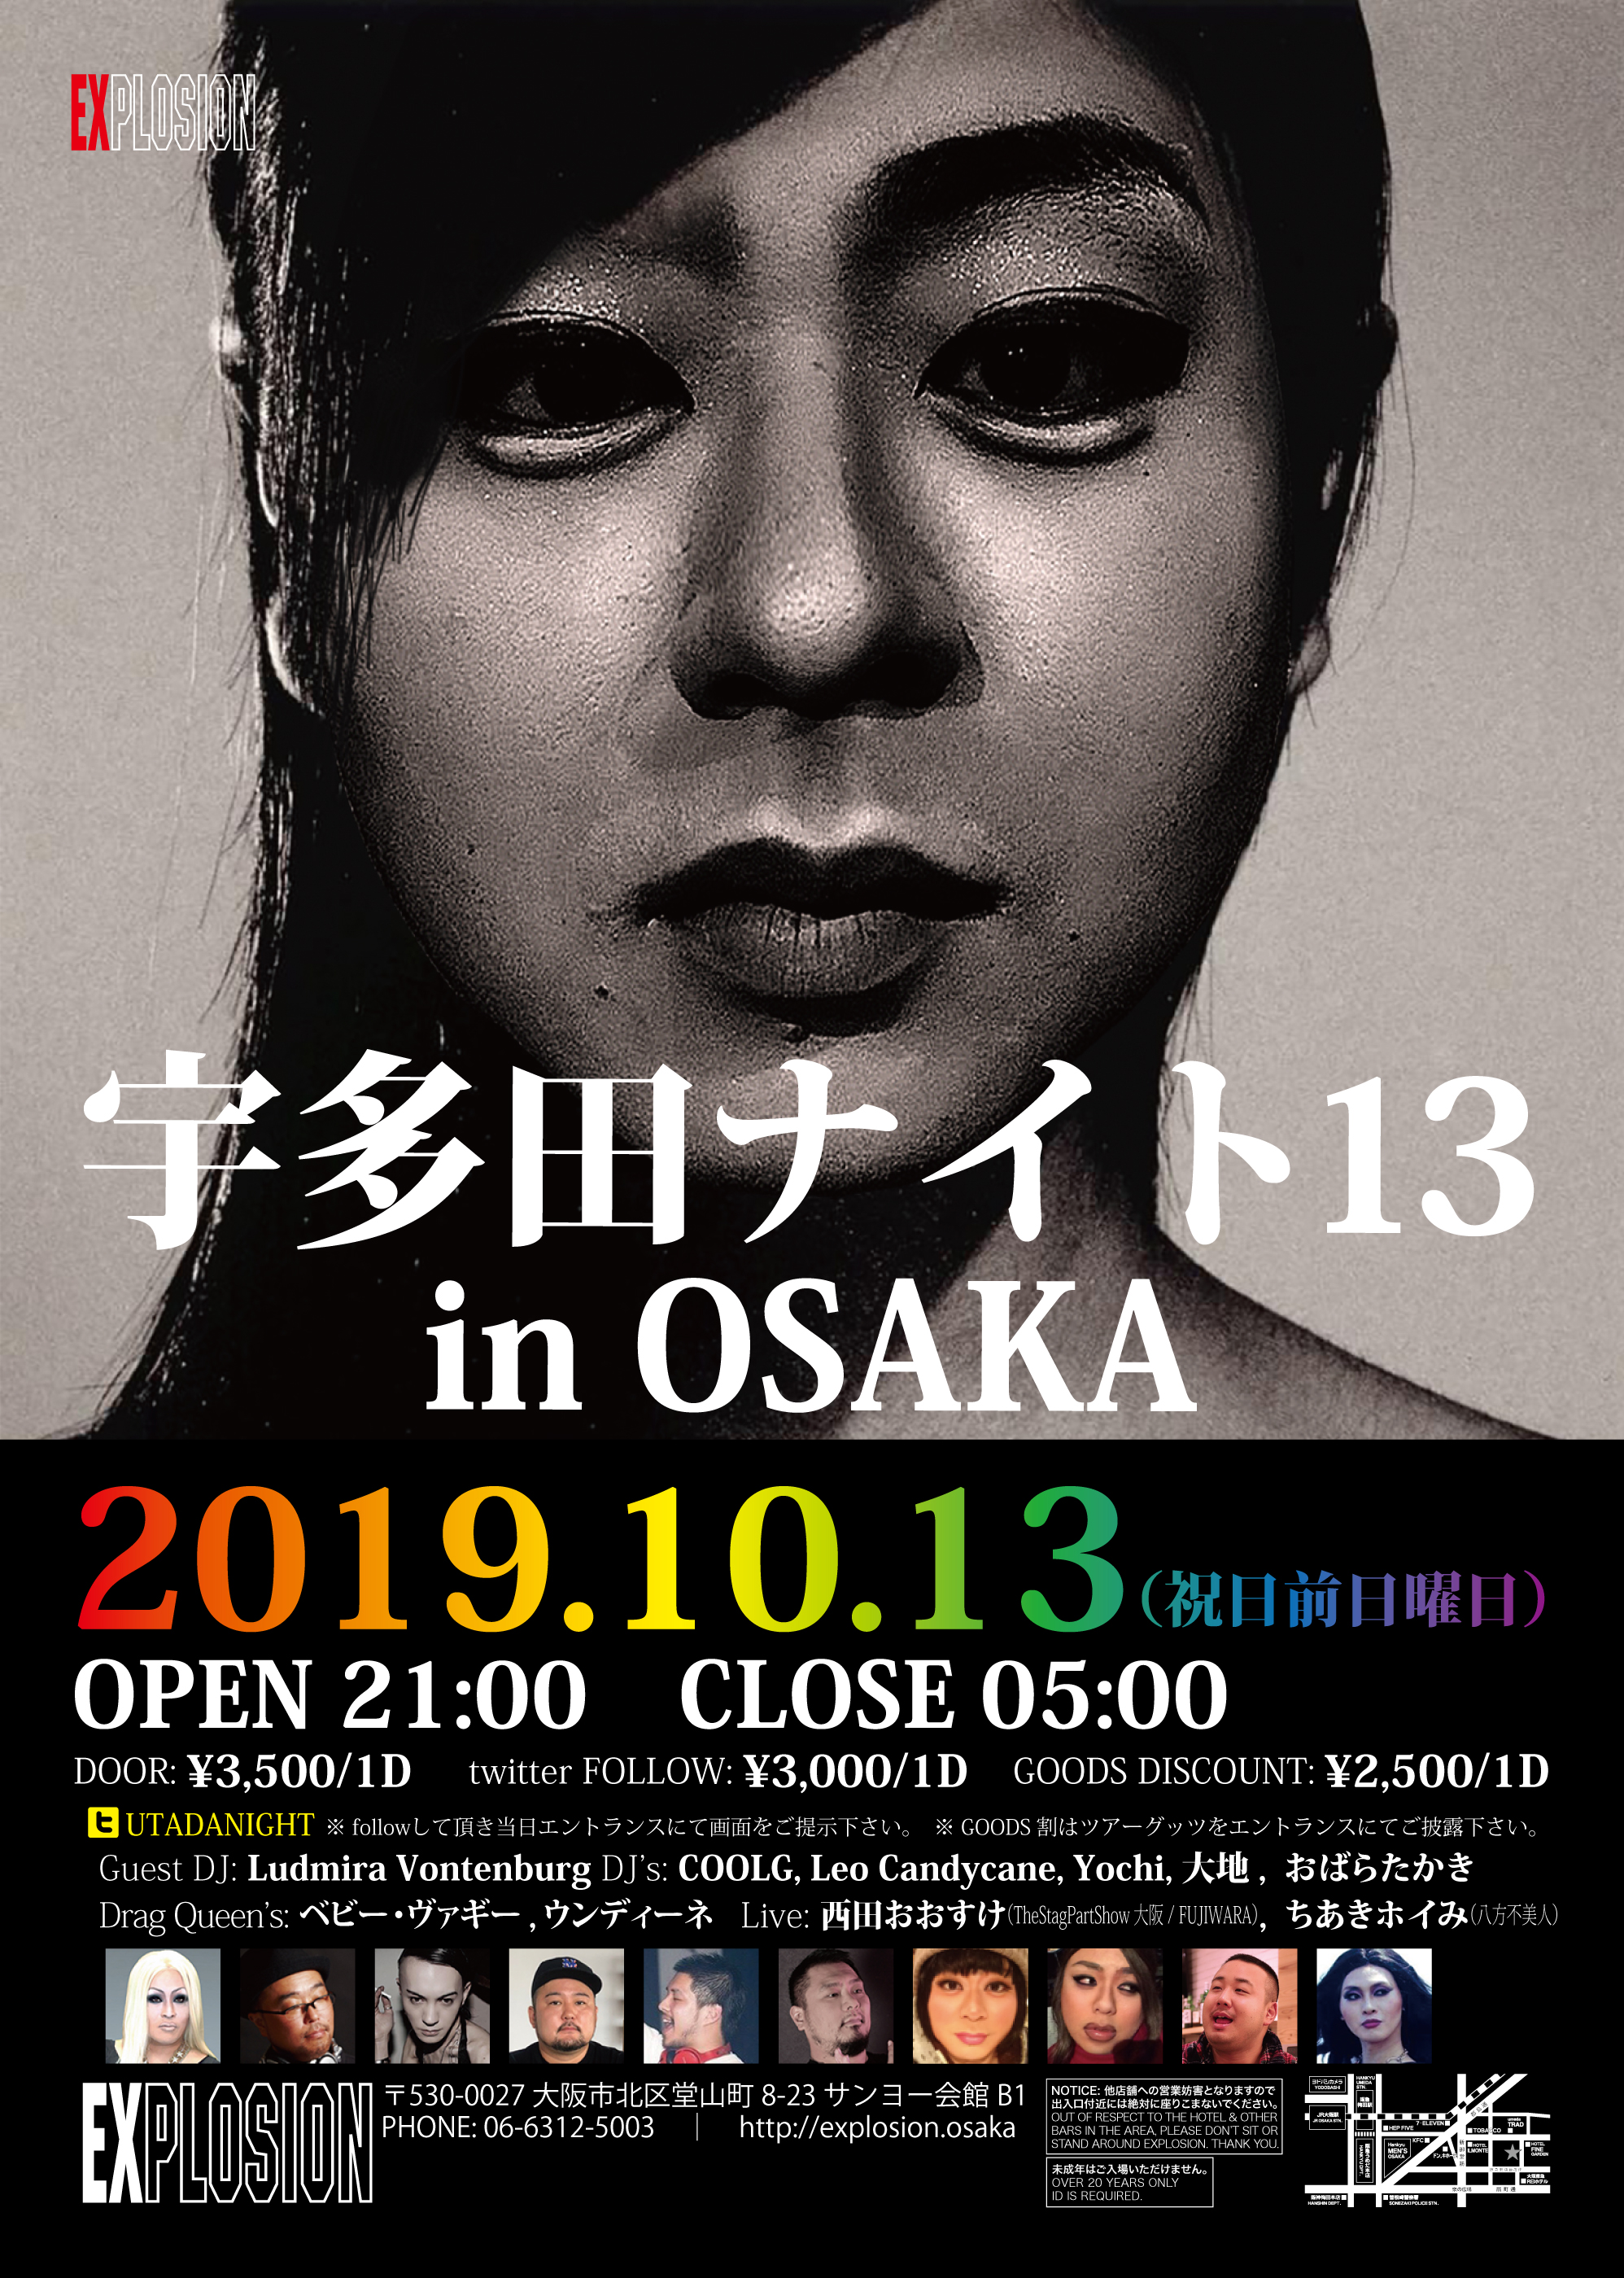 10/13(SUN・祝前) 21:00～5:00 宇多田ナイト13 in OSAKA ＜MIX＞